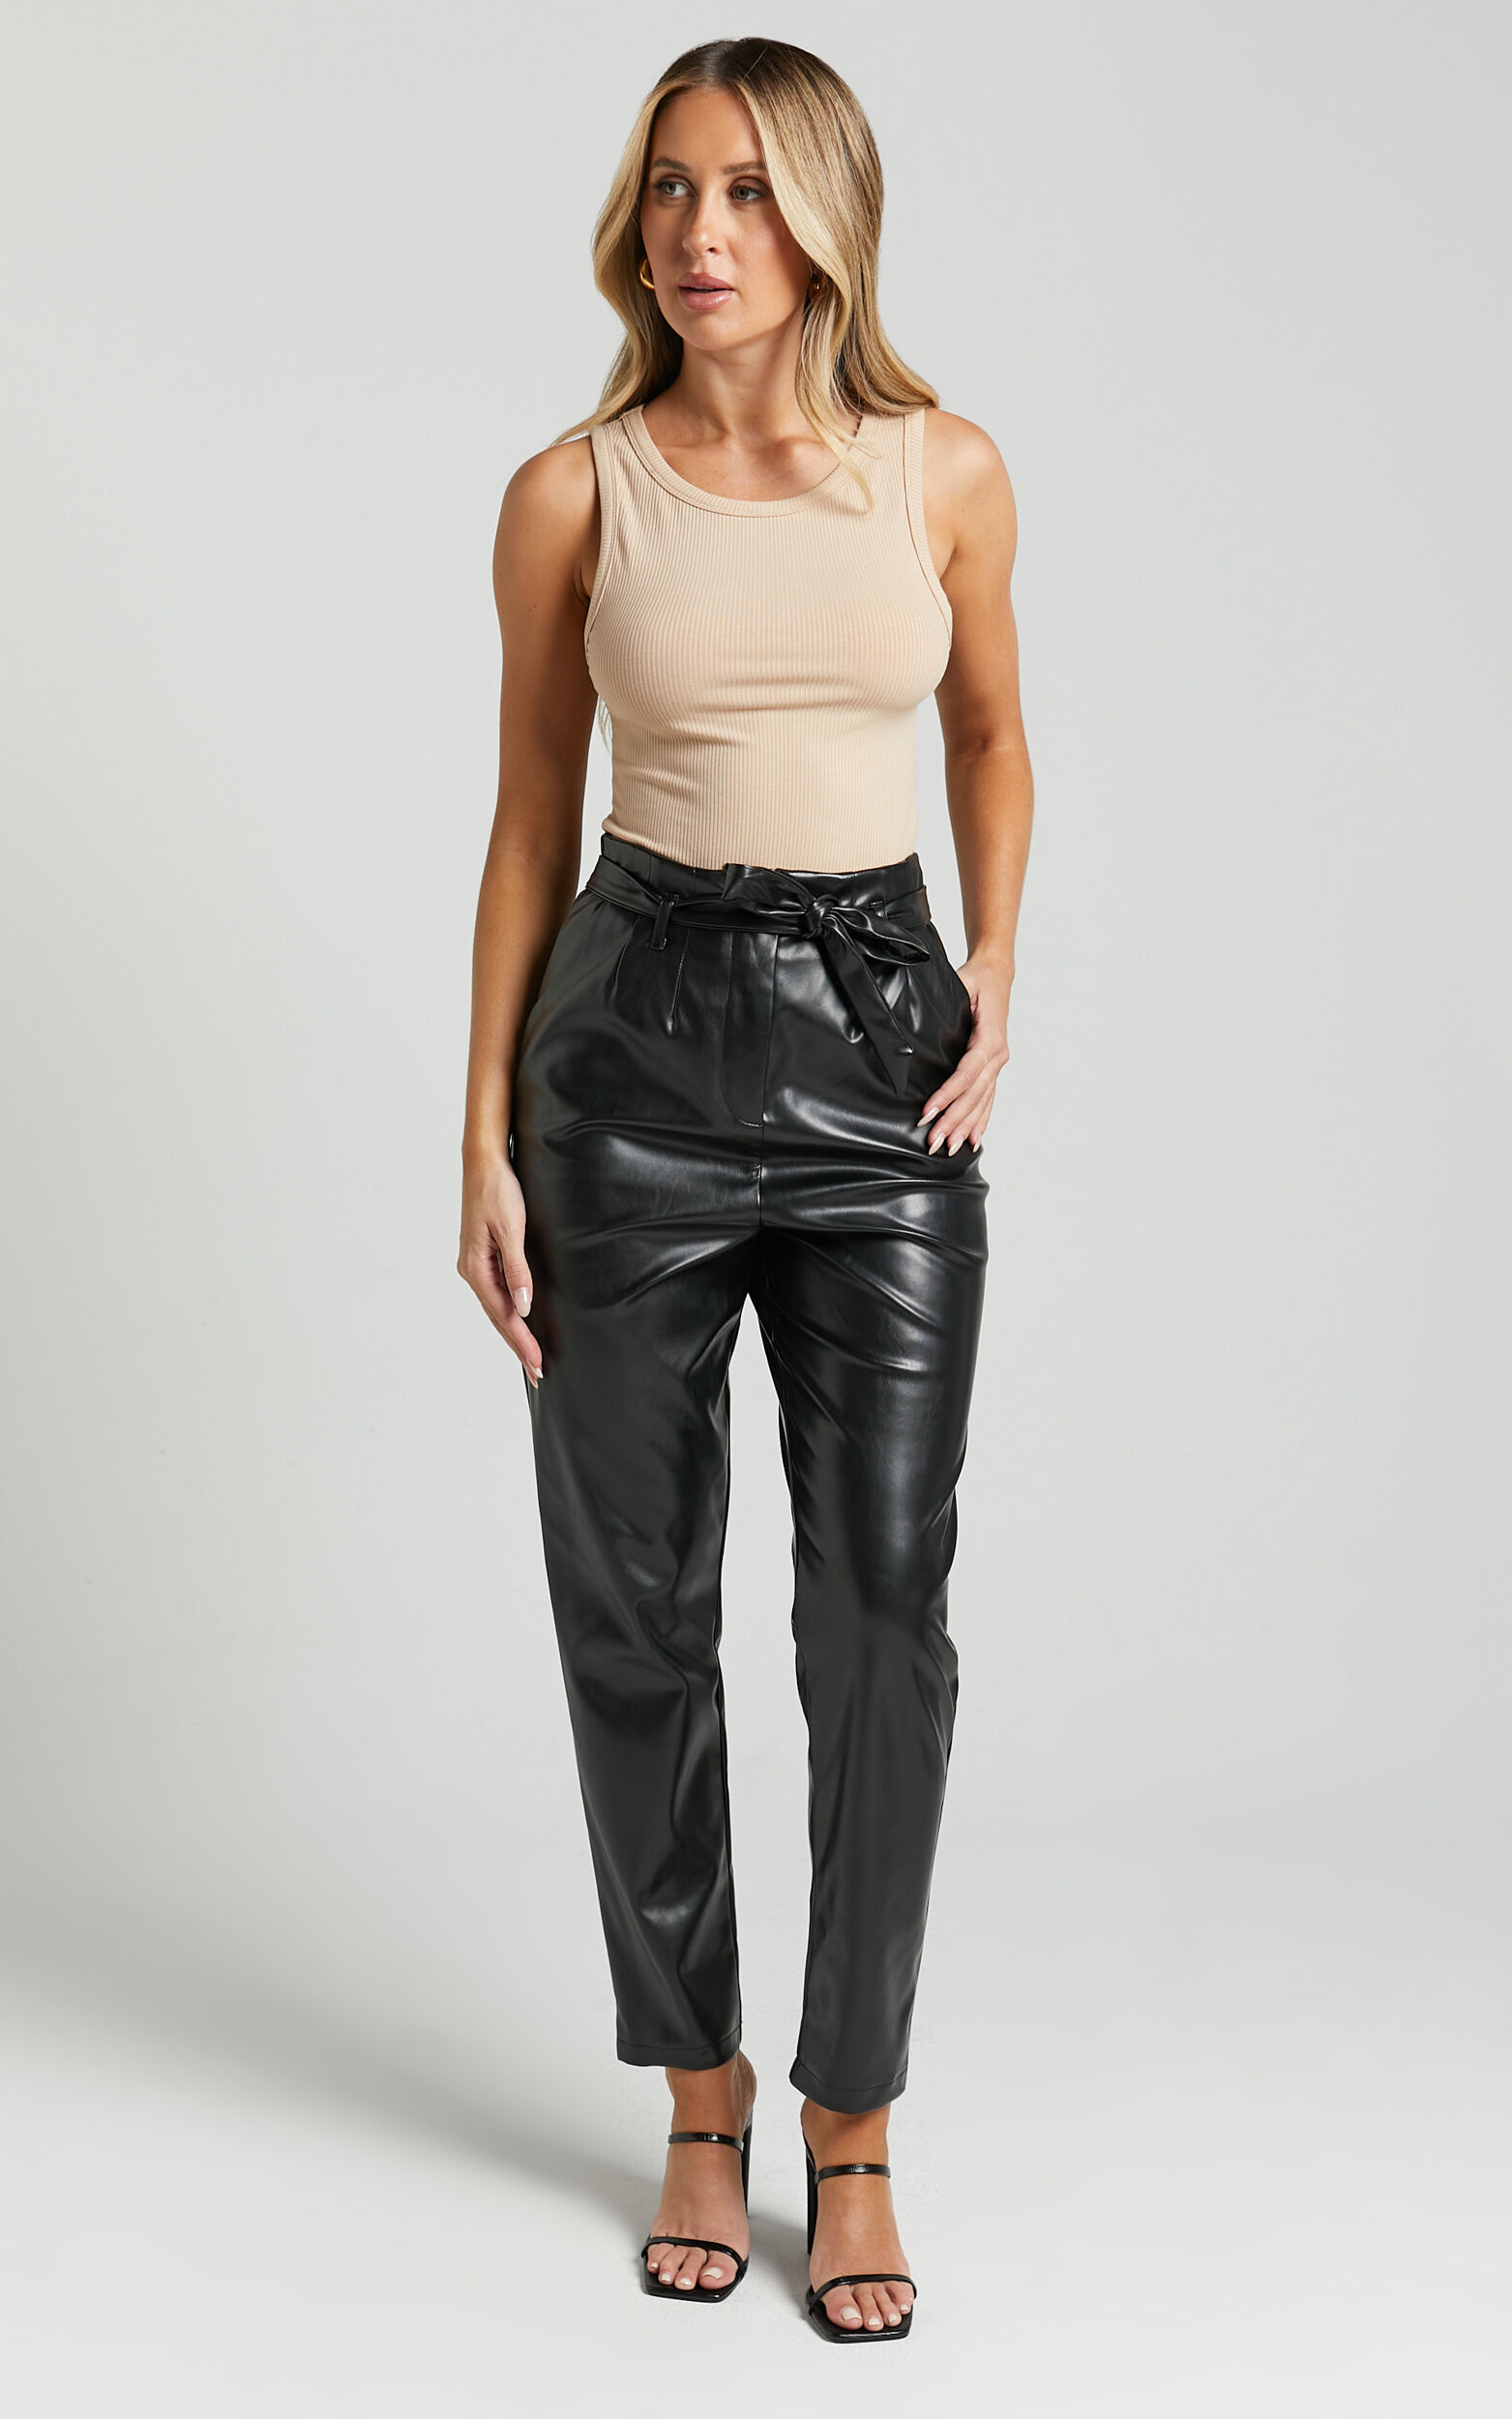 lystmrge Paper Bag Pants Women Leather Real Leather Pants C Women Fashion  Solid Fold Bow Trousers Sexy Leather Tight Leggings Pocket Pant 